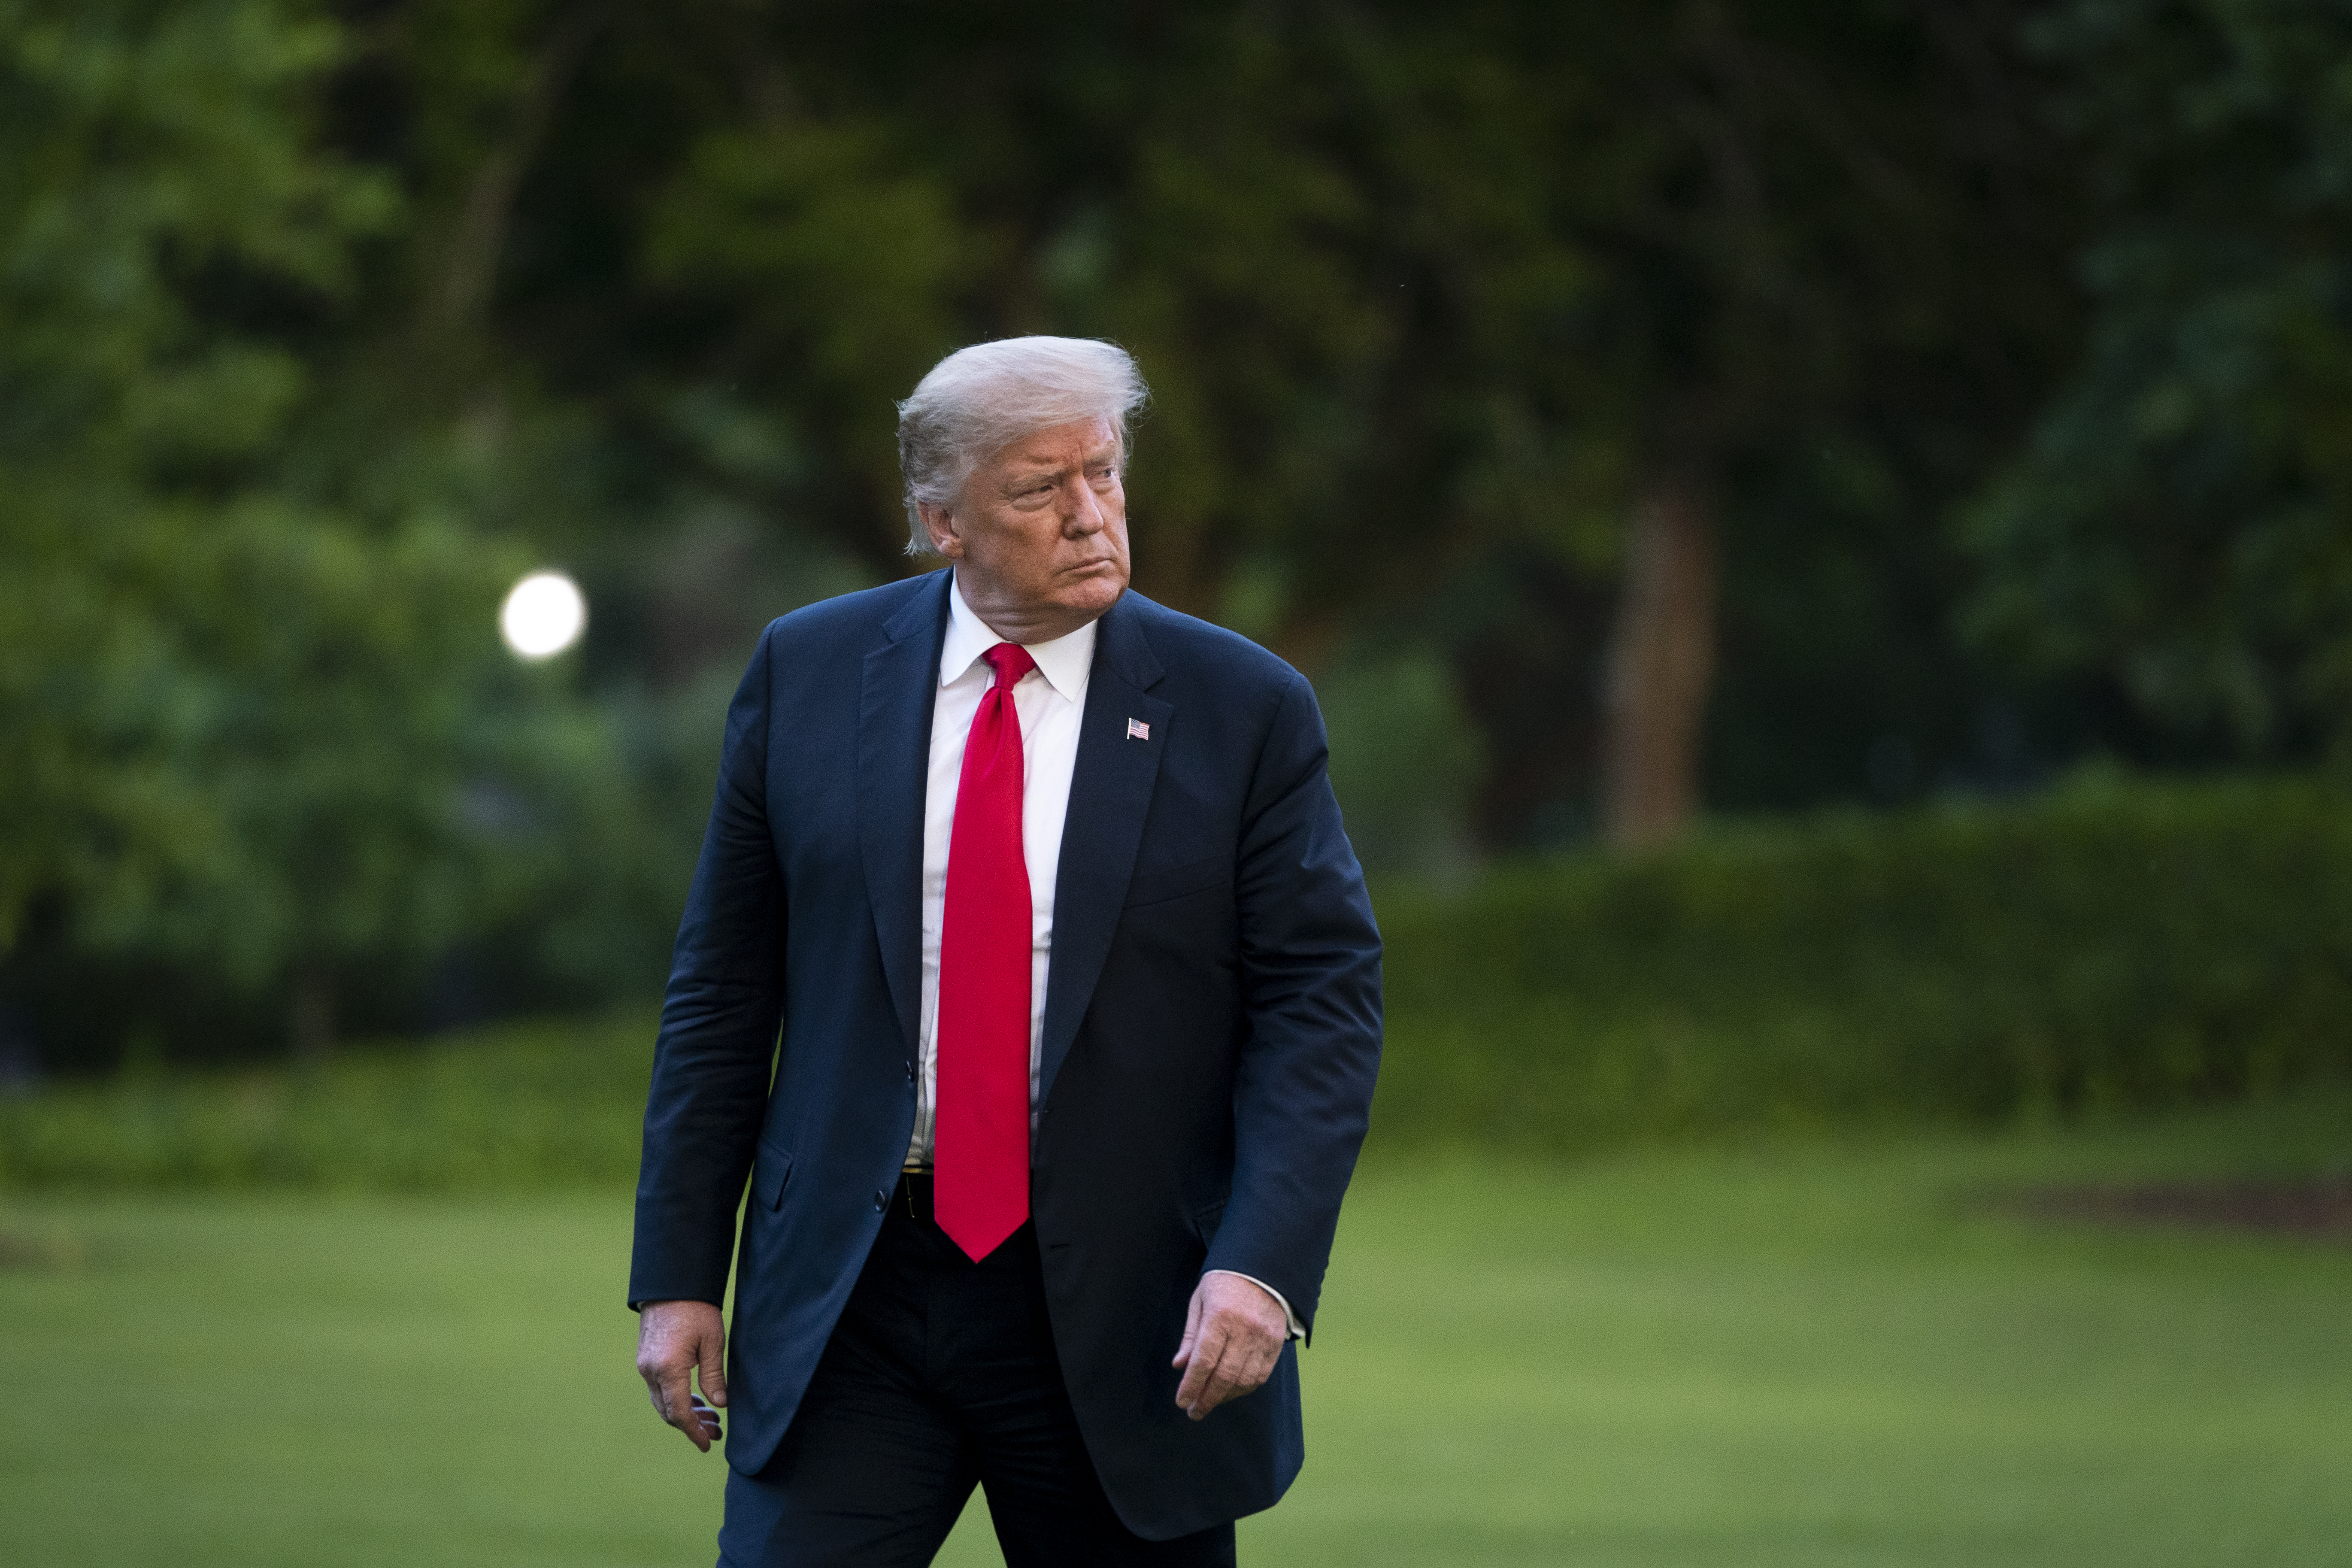 WASHINGTON, DC - JUNE 25: U.S. President Donald Trump walks to the White House residence after exiting Marine One on the South Lawn on June 25, 2020 in Washington, DC. President Trump traveled to Wisconsin on Thursday for a Fox News town hall event and a visit to a shipbuilding manufacturer. (Photo by Drew Angerer/Getty Images)